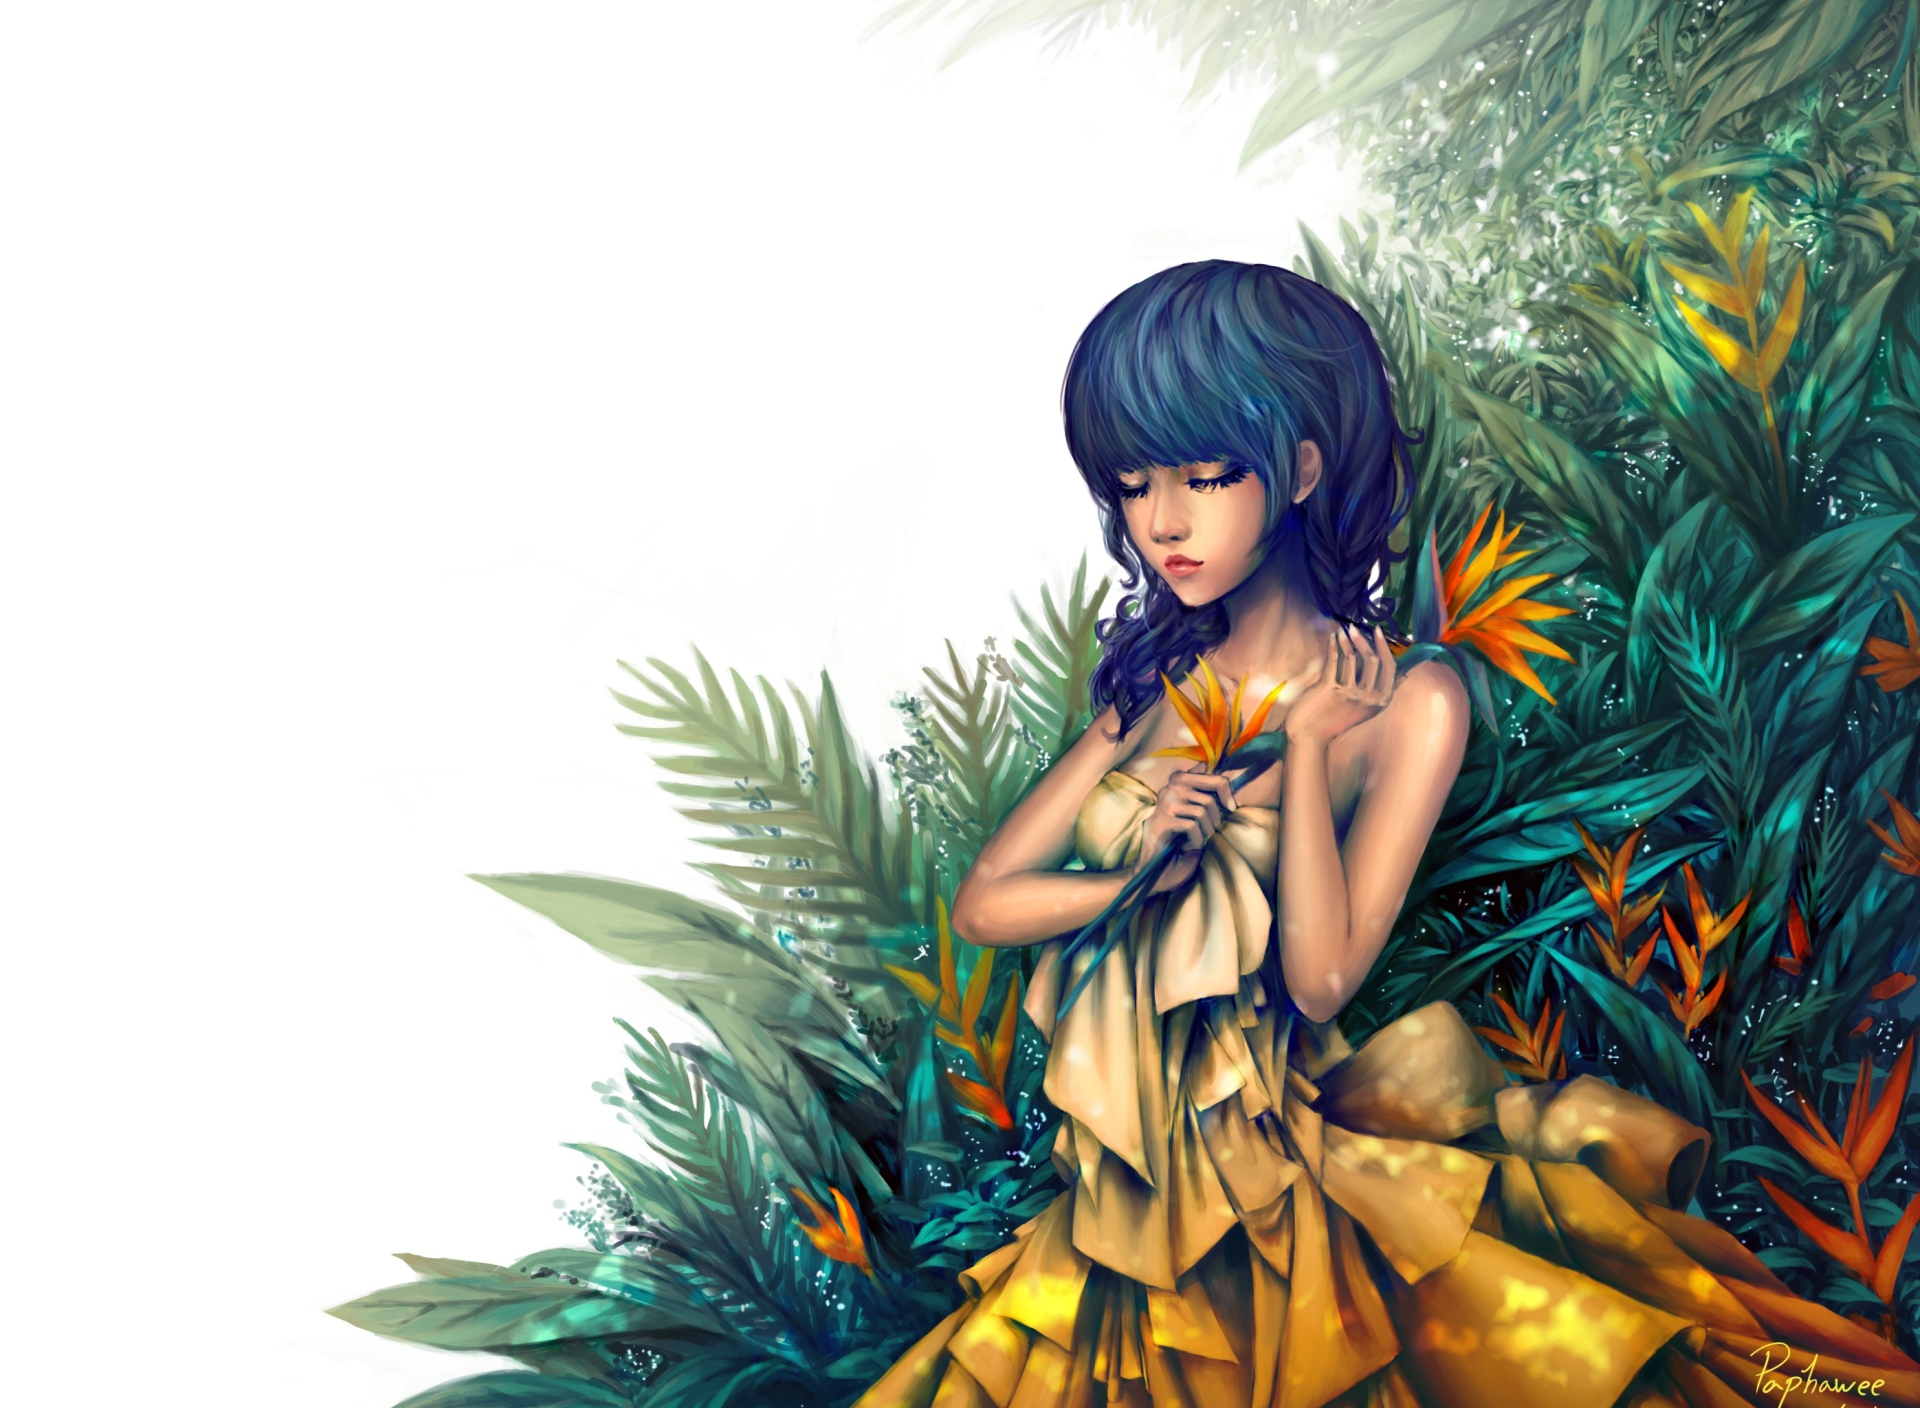 Girl In Yellow Dress Painting wallpaper 1920x1408